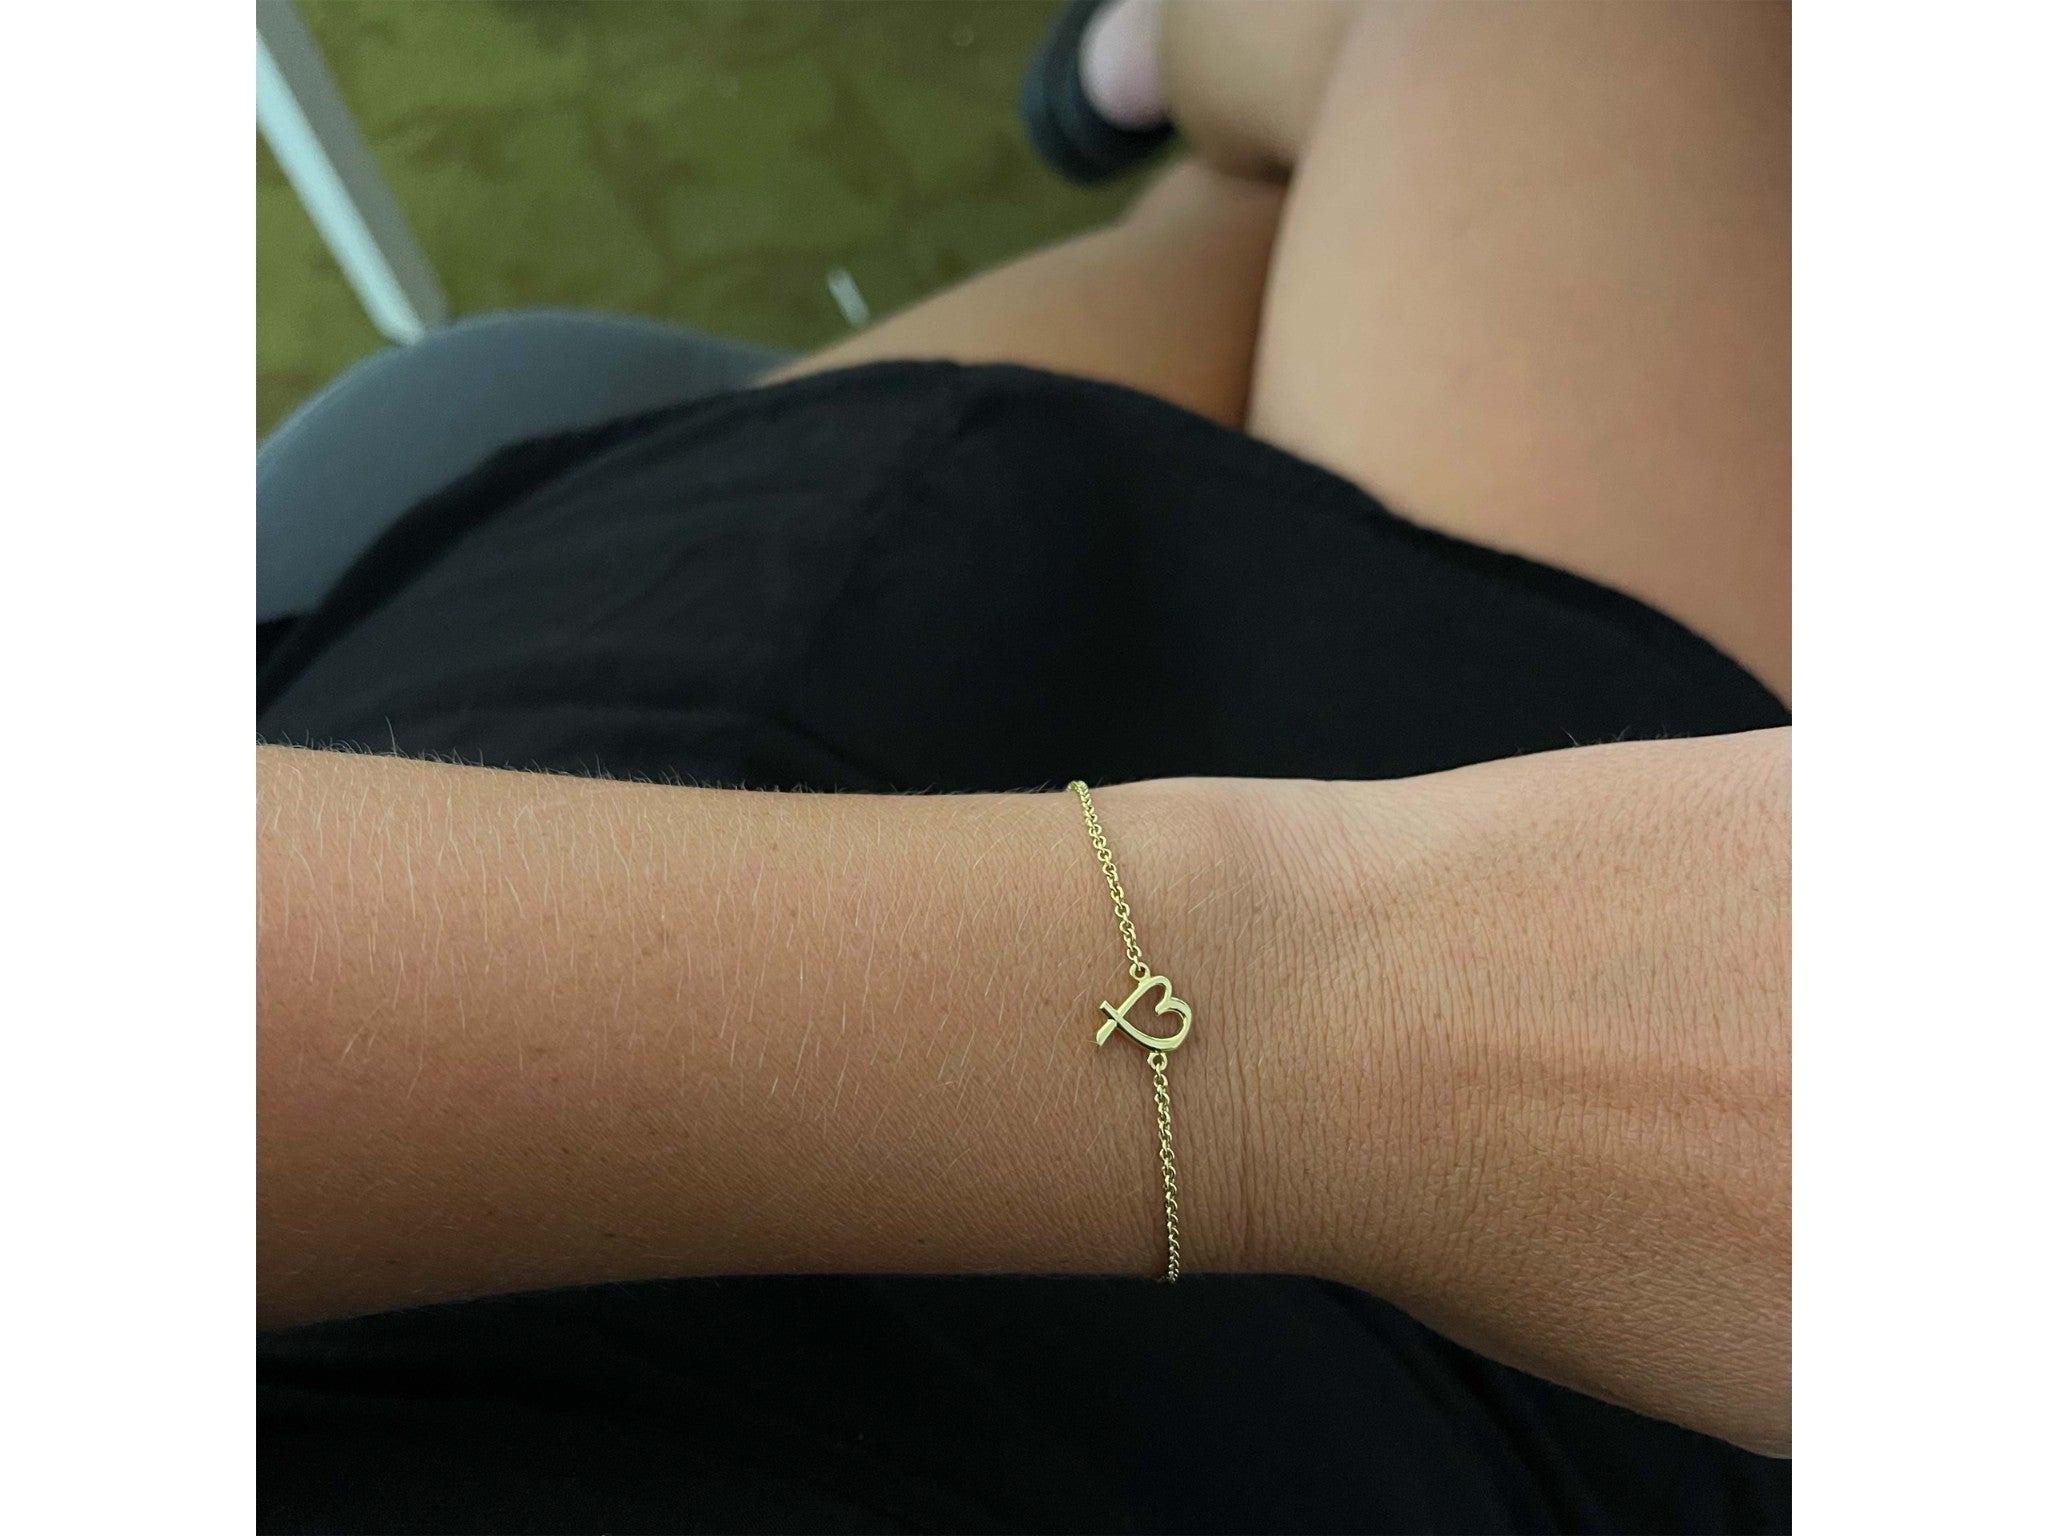 Tiffany and Co. Loving Heart Bracelet in 18k Yellow Gold